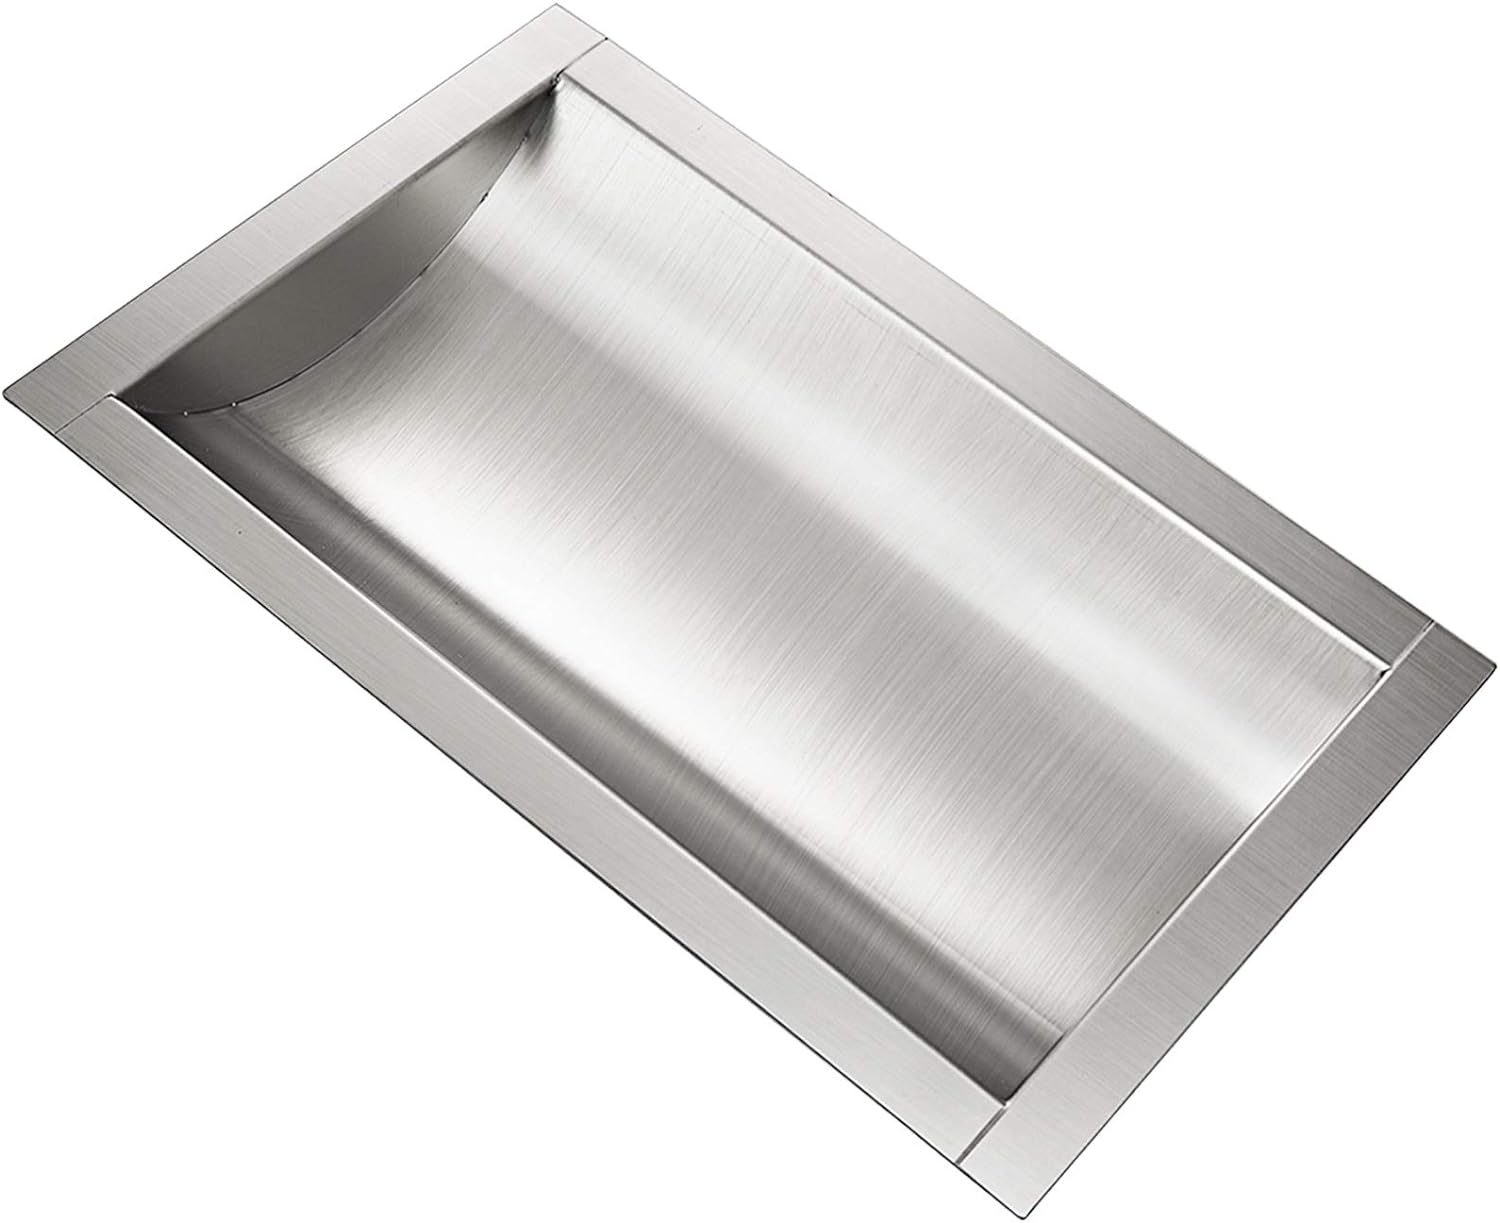 x 10" d 12" Stainless Steel Drop-In Deal Tray Brushed Finish w 